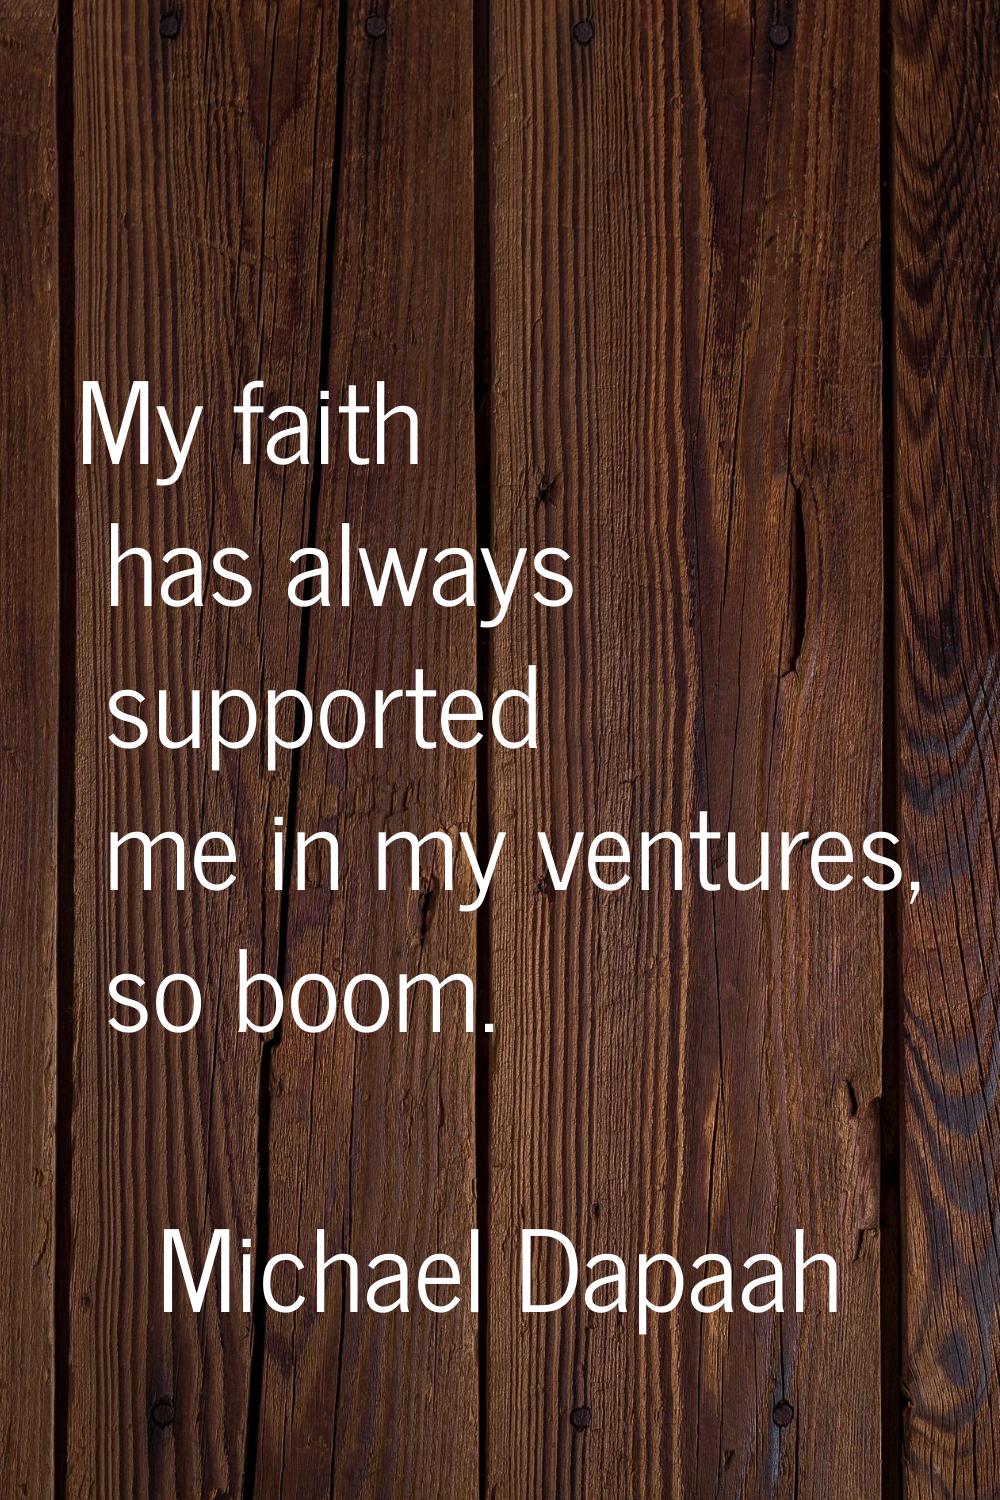 My faith has always supported me in my ventures, so boom.